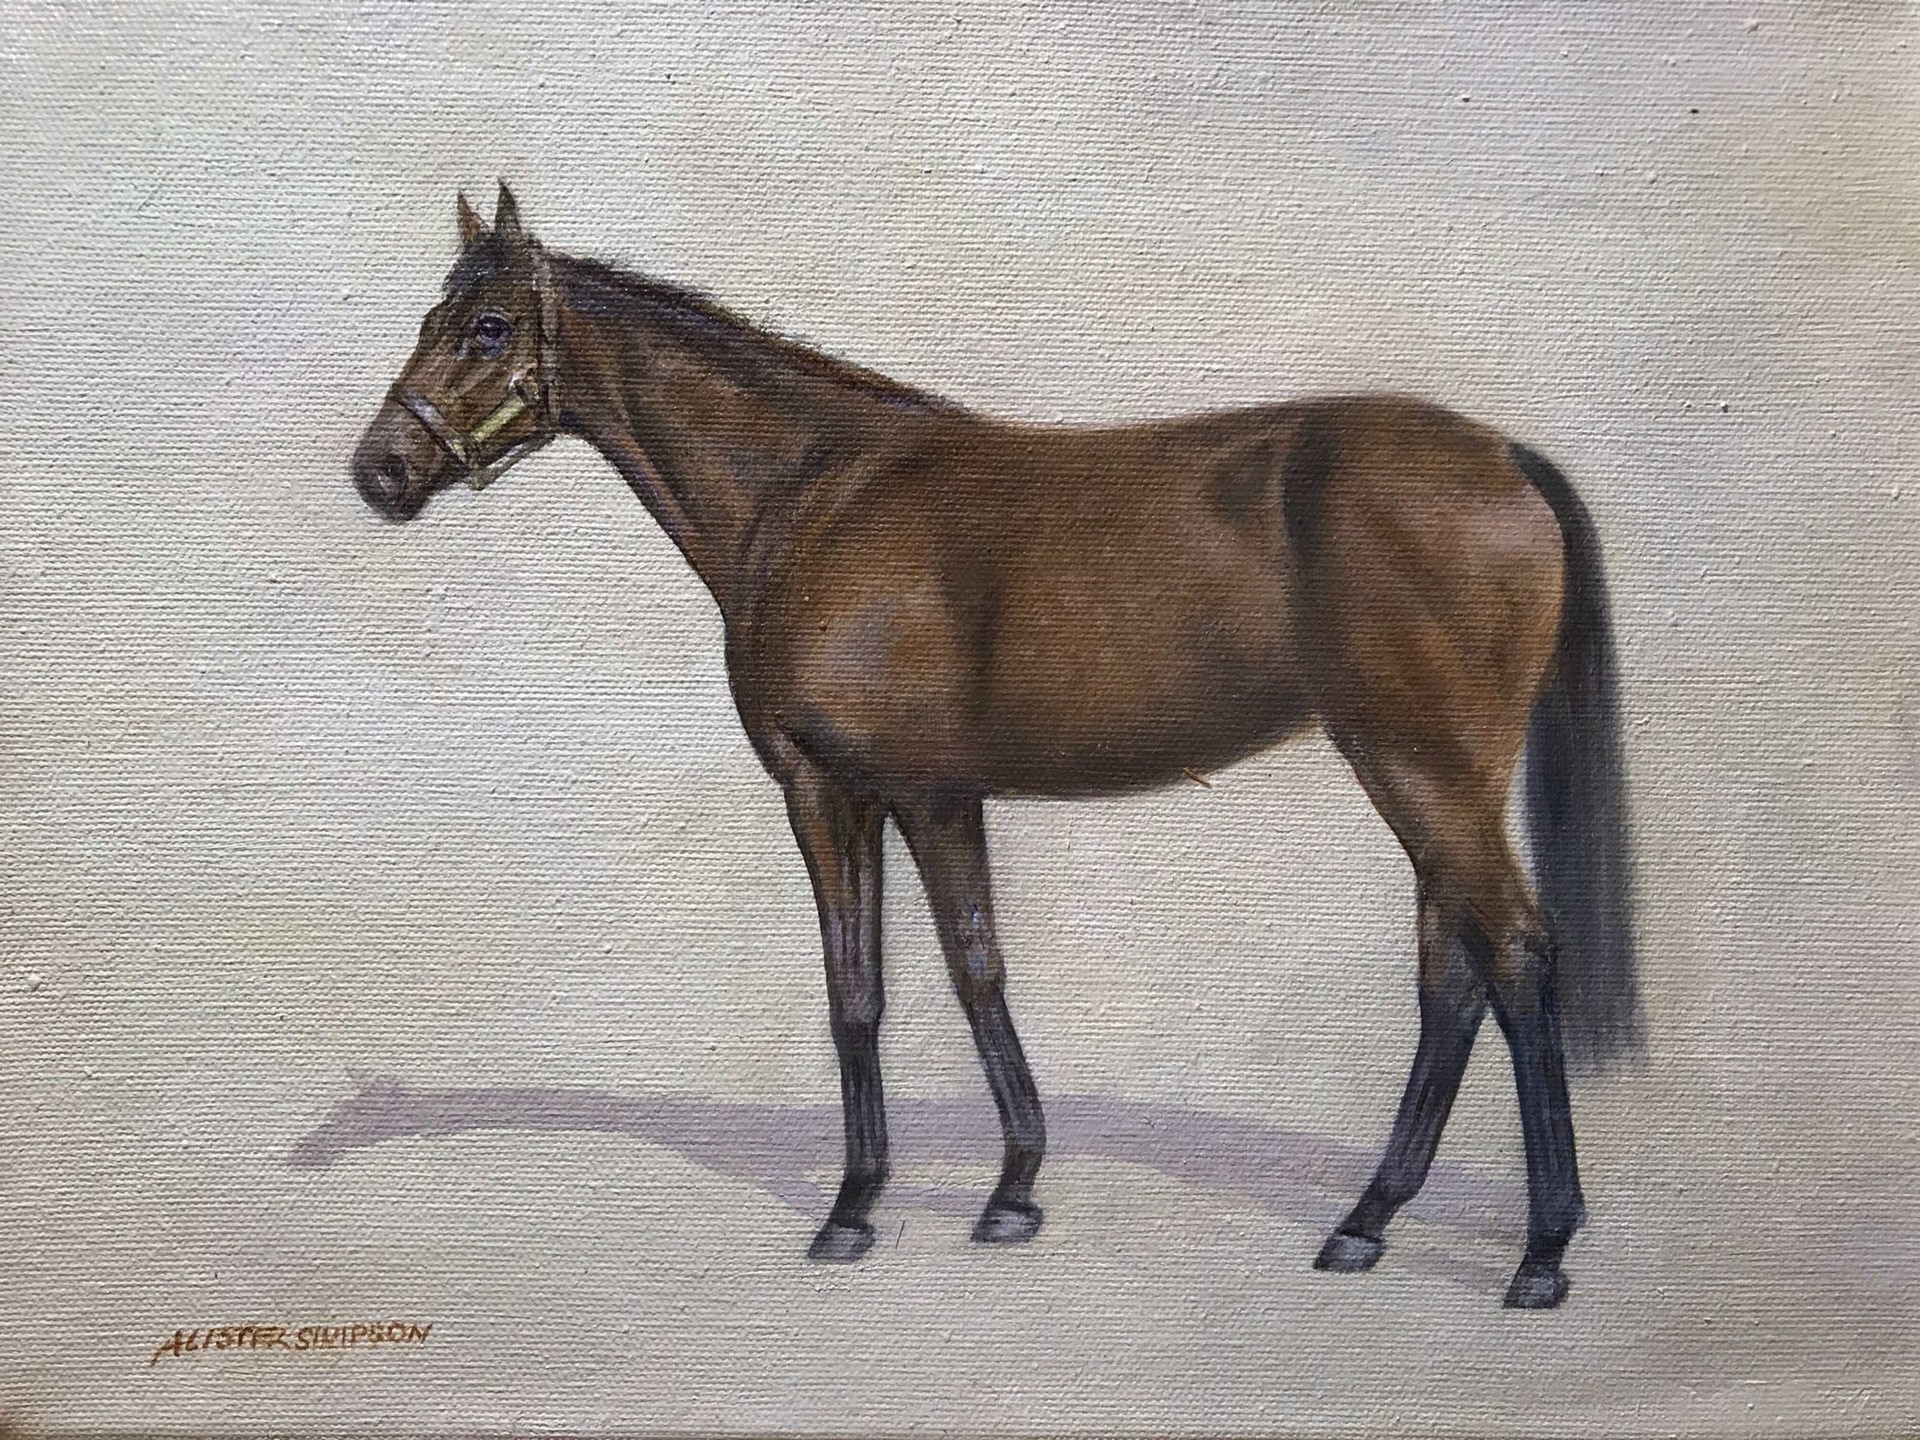 Brood Mare by Alister Simpson